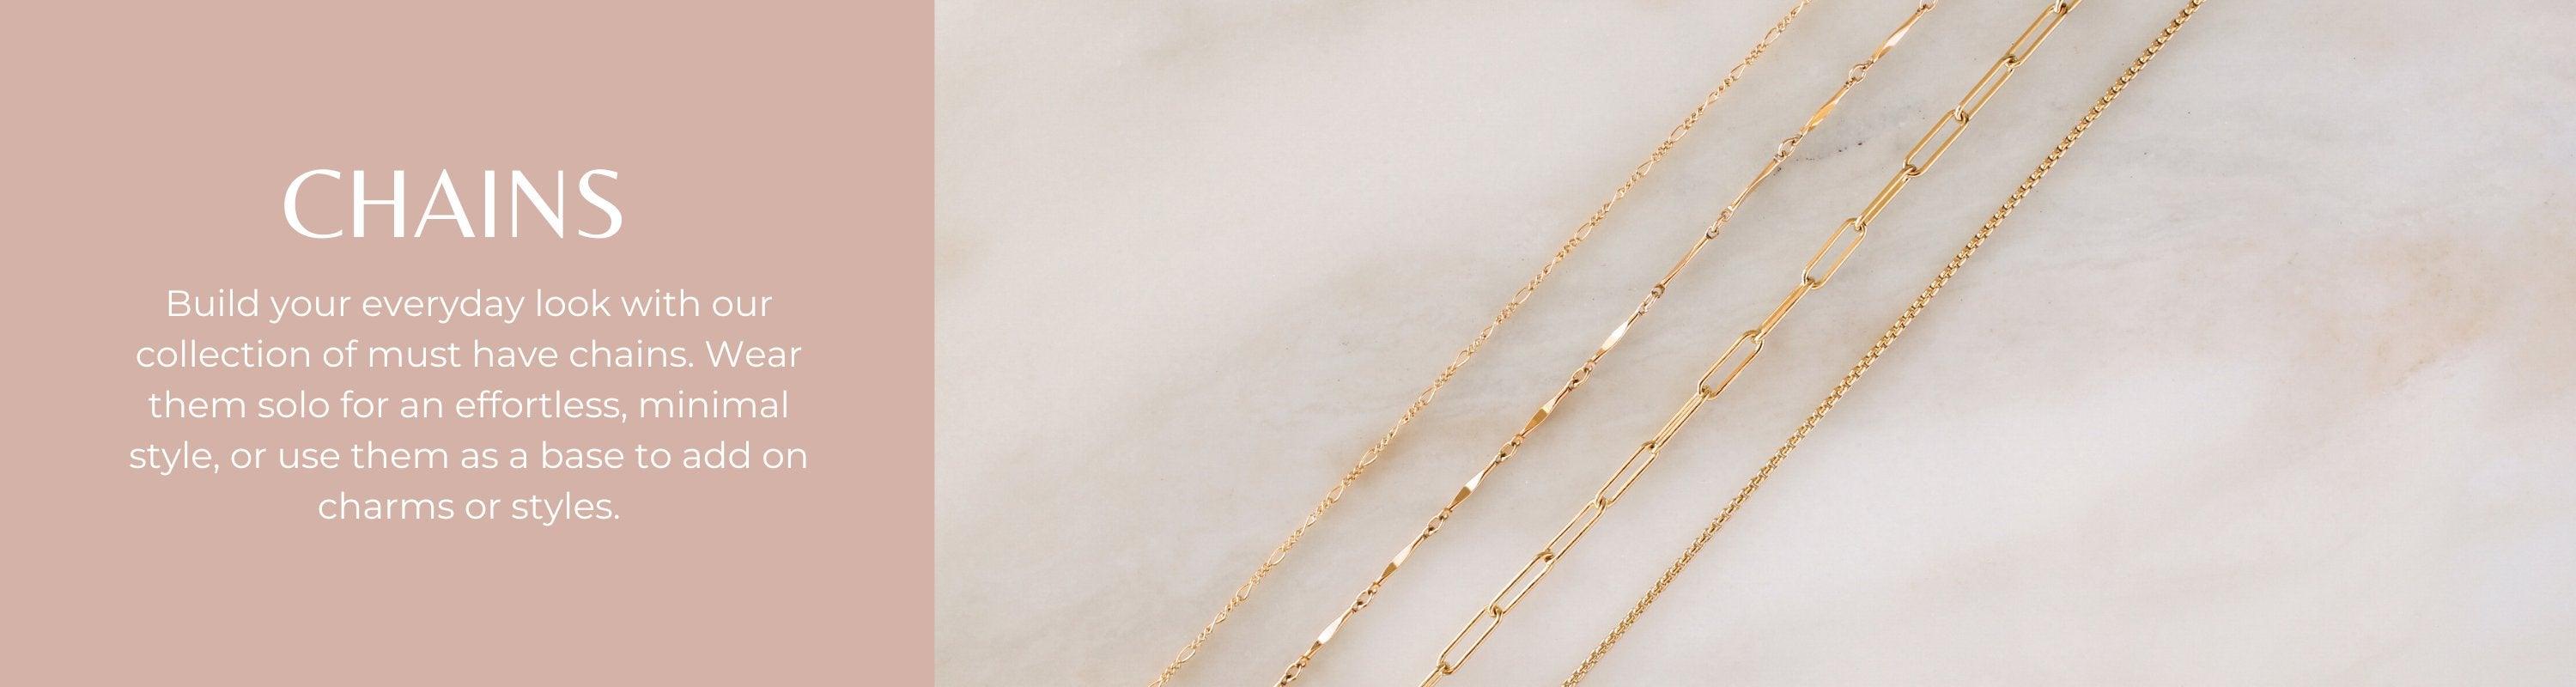 Chains - Nolia Jewelry - Meaningful + Sustainably Handcrafted Jewelry